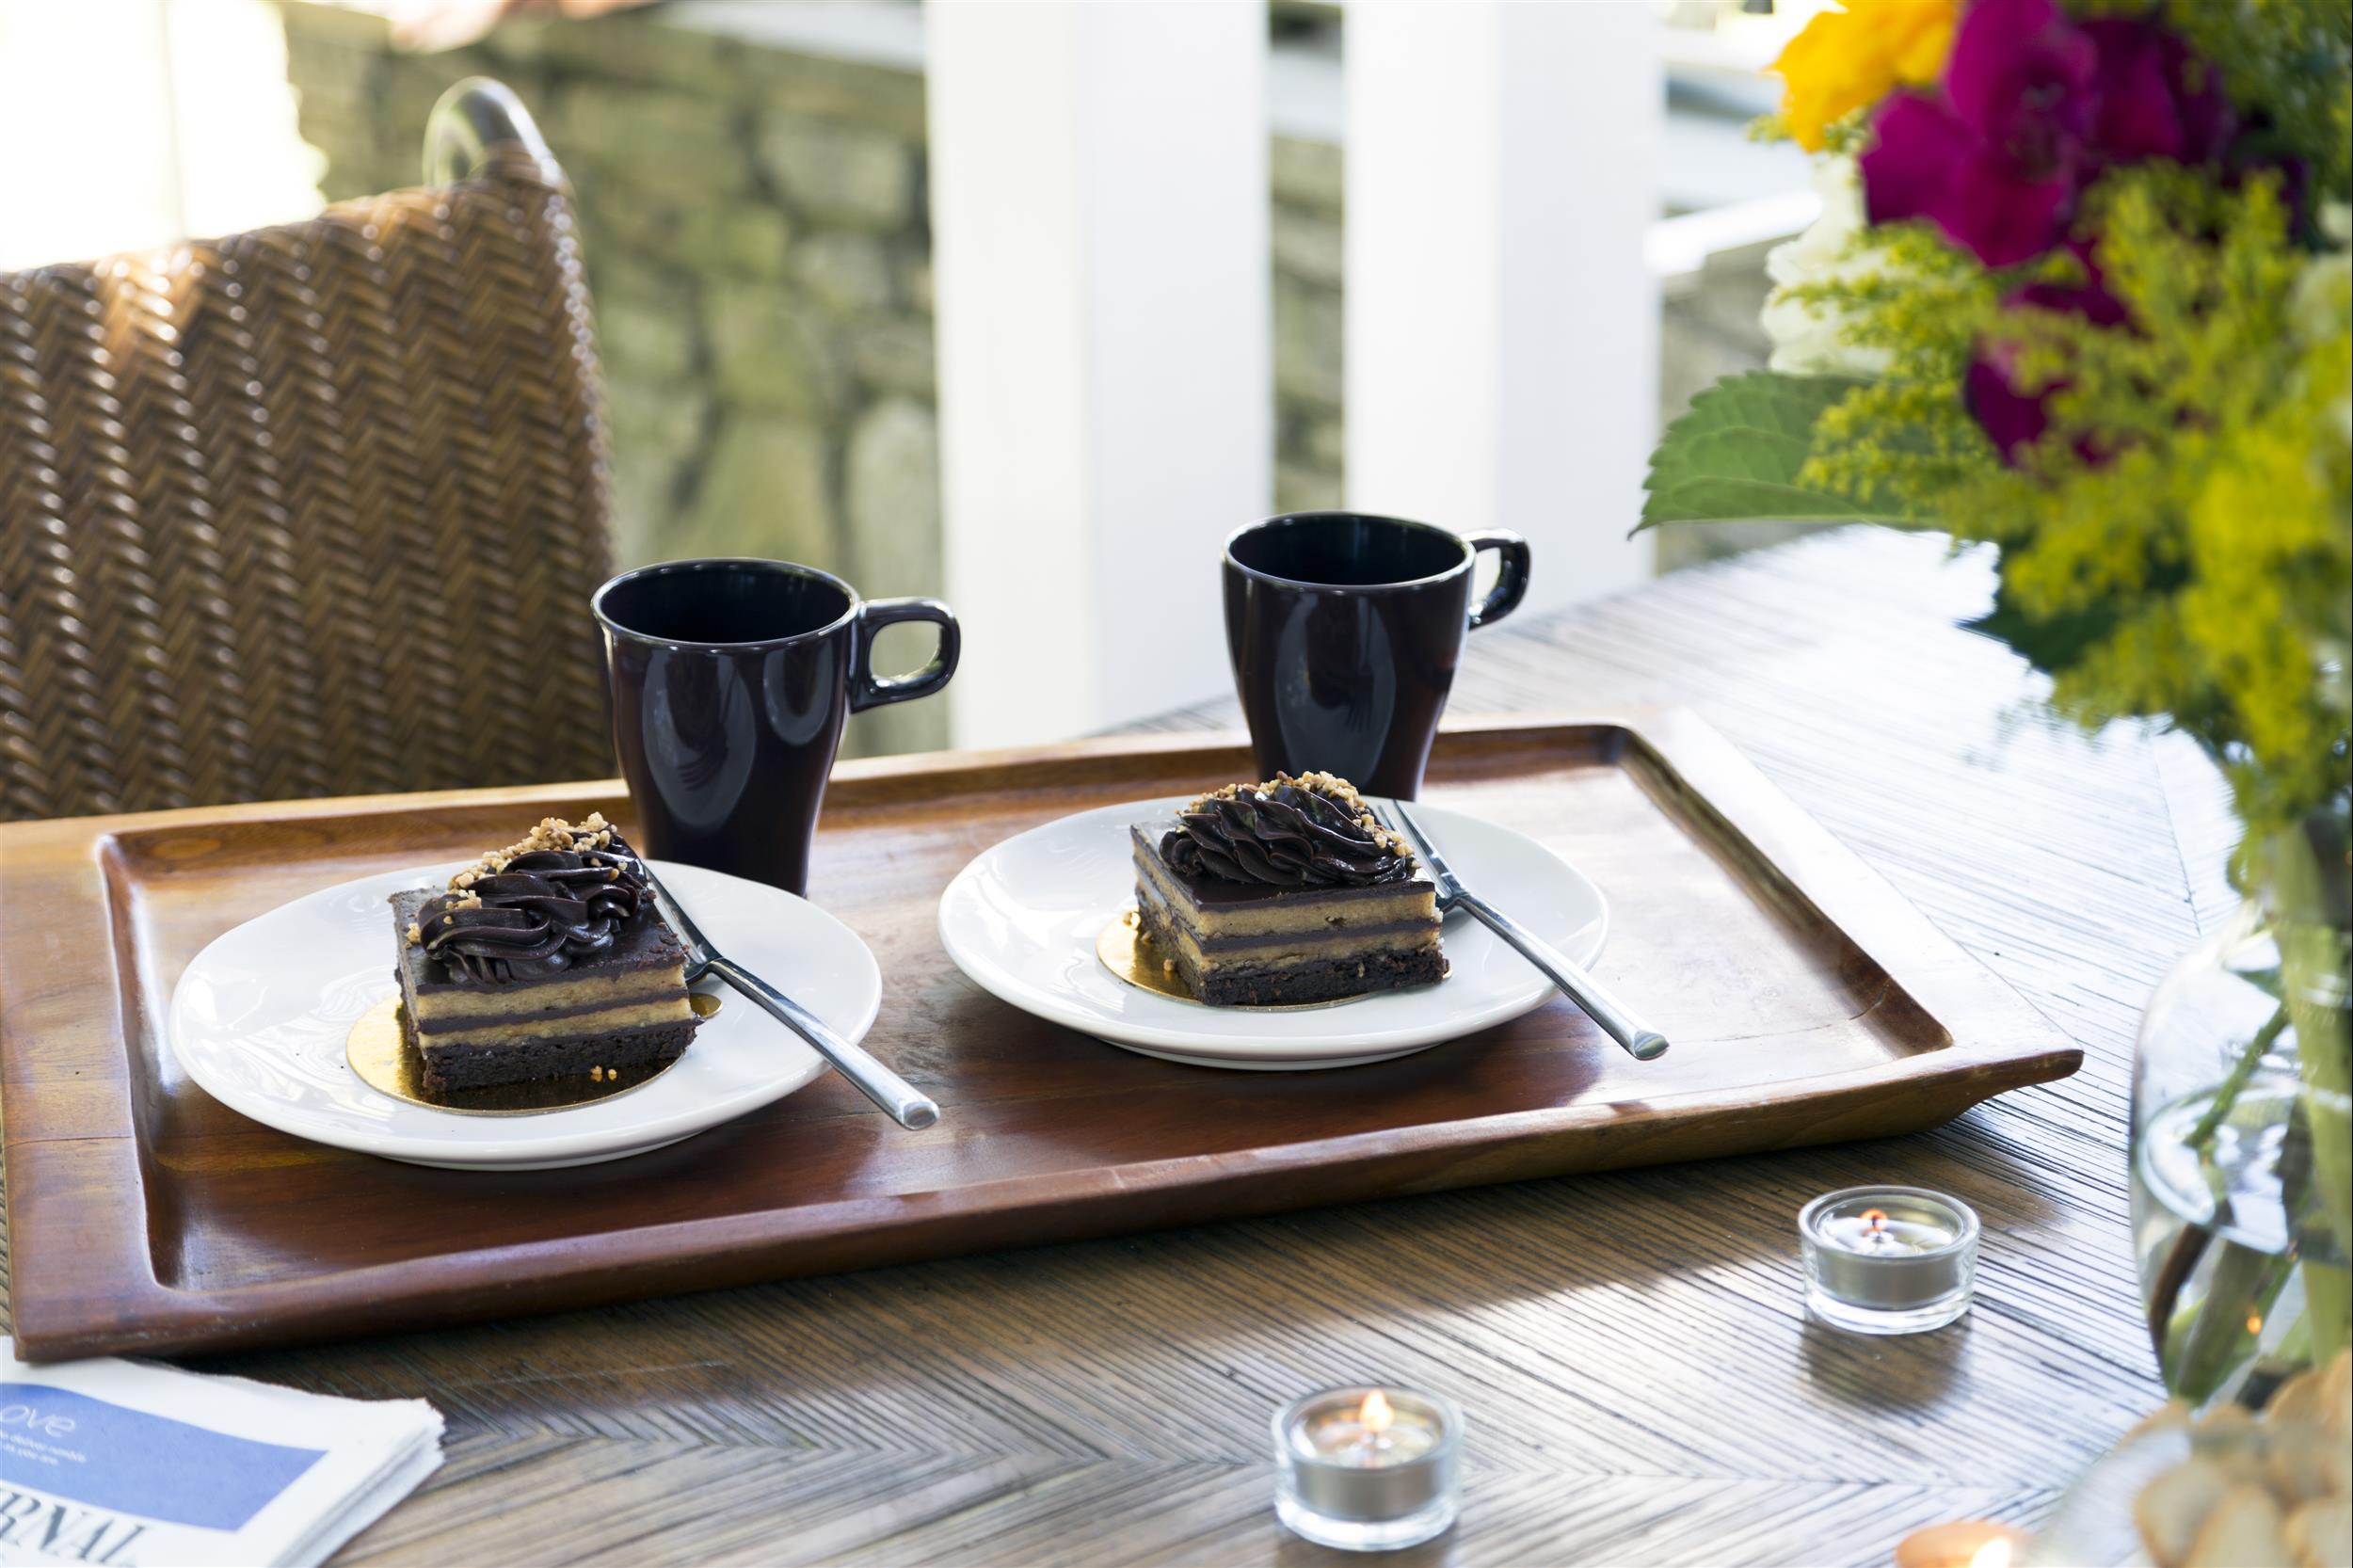 Two pieces of cake and coffee mugs on a serving tray